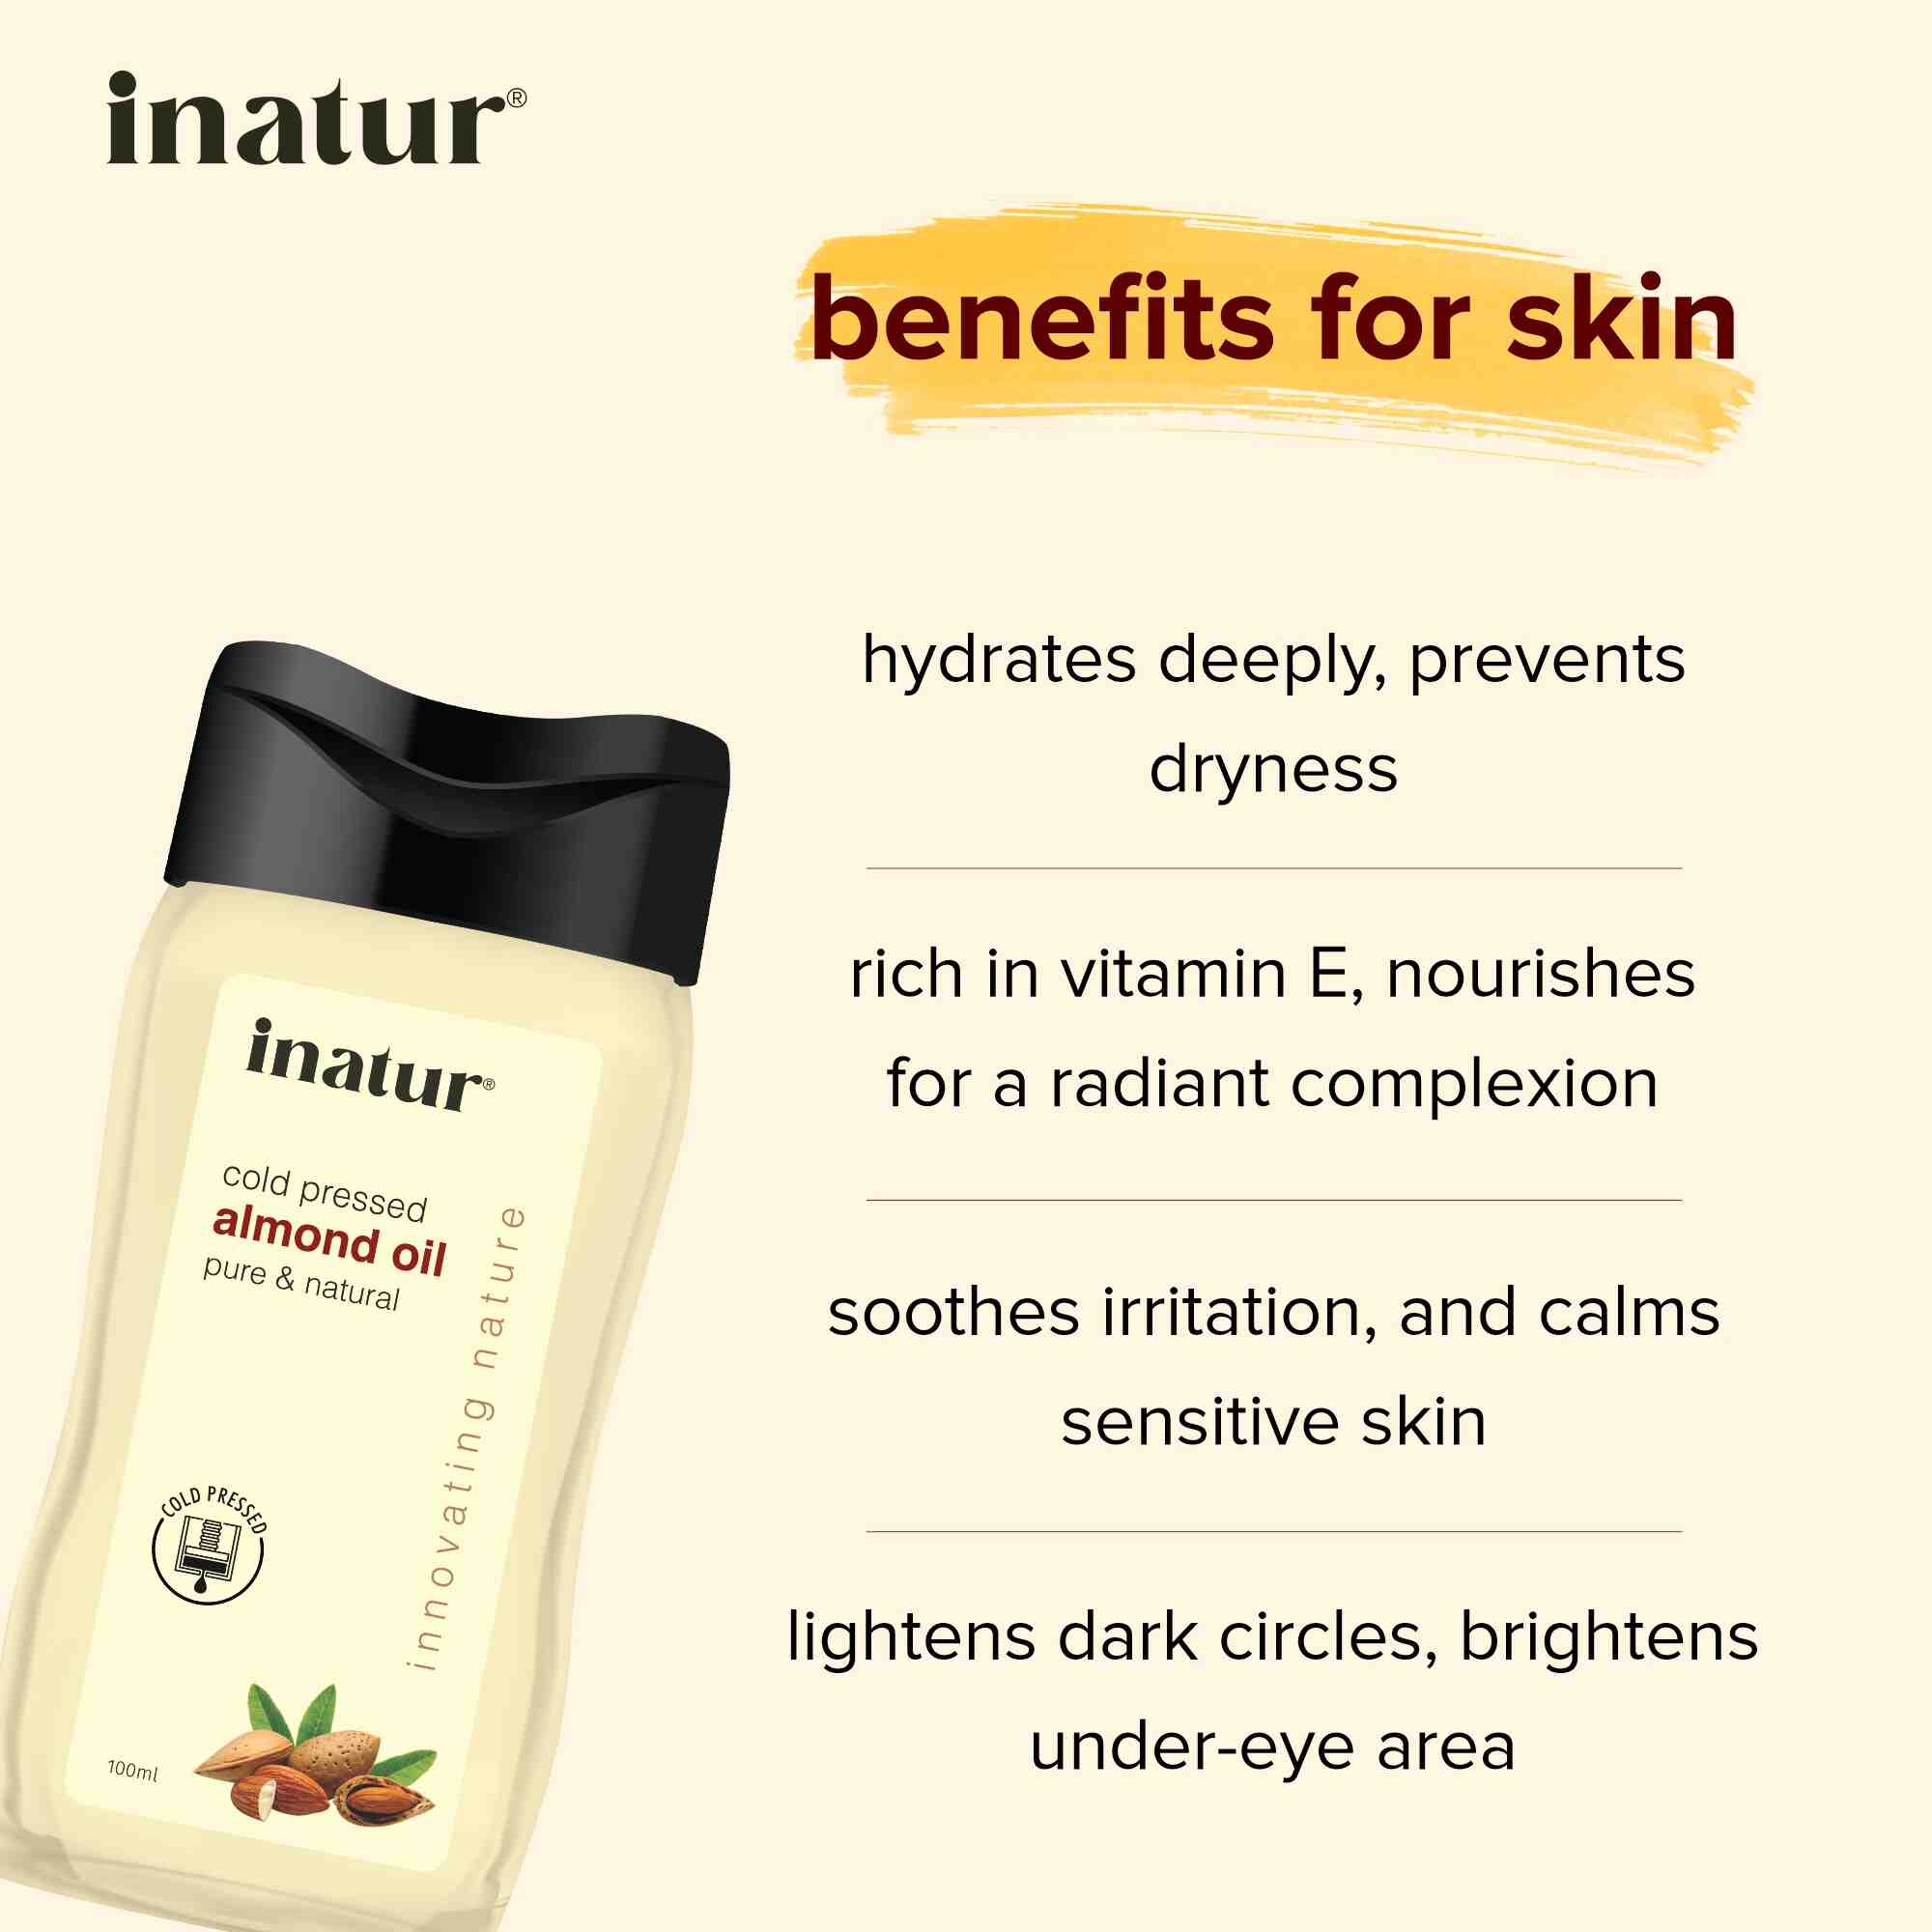 inatur cold pressed almond oil benefits for skin